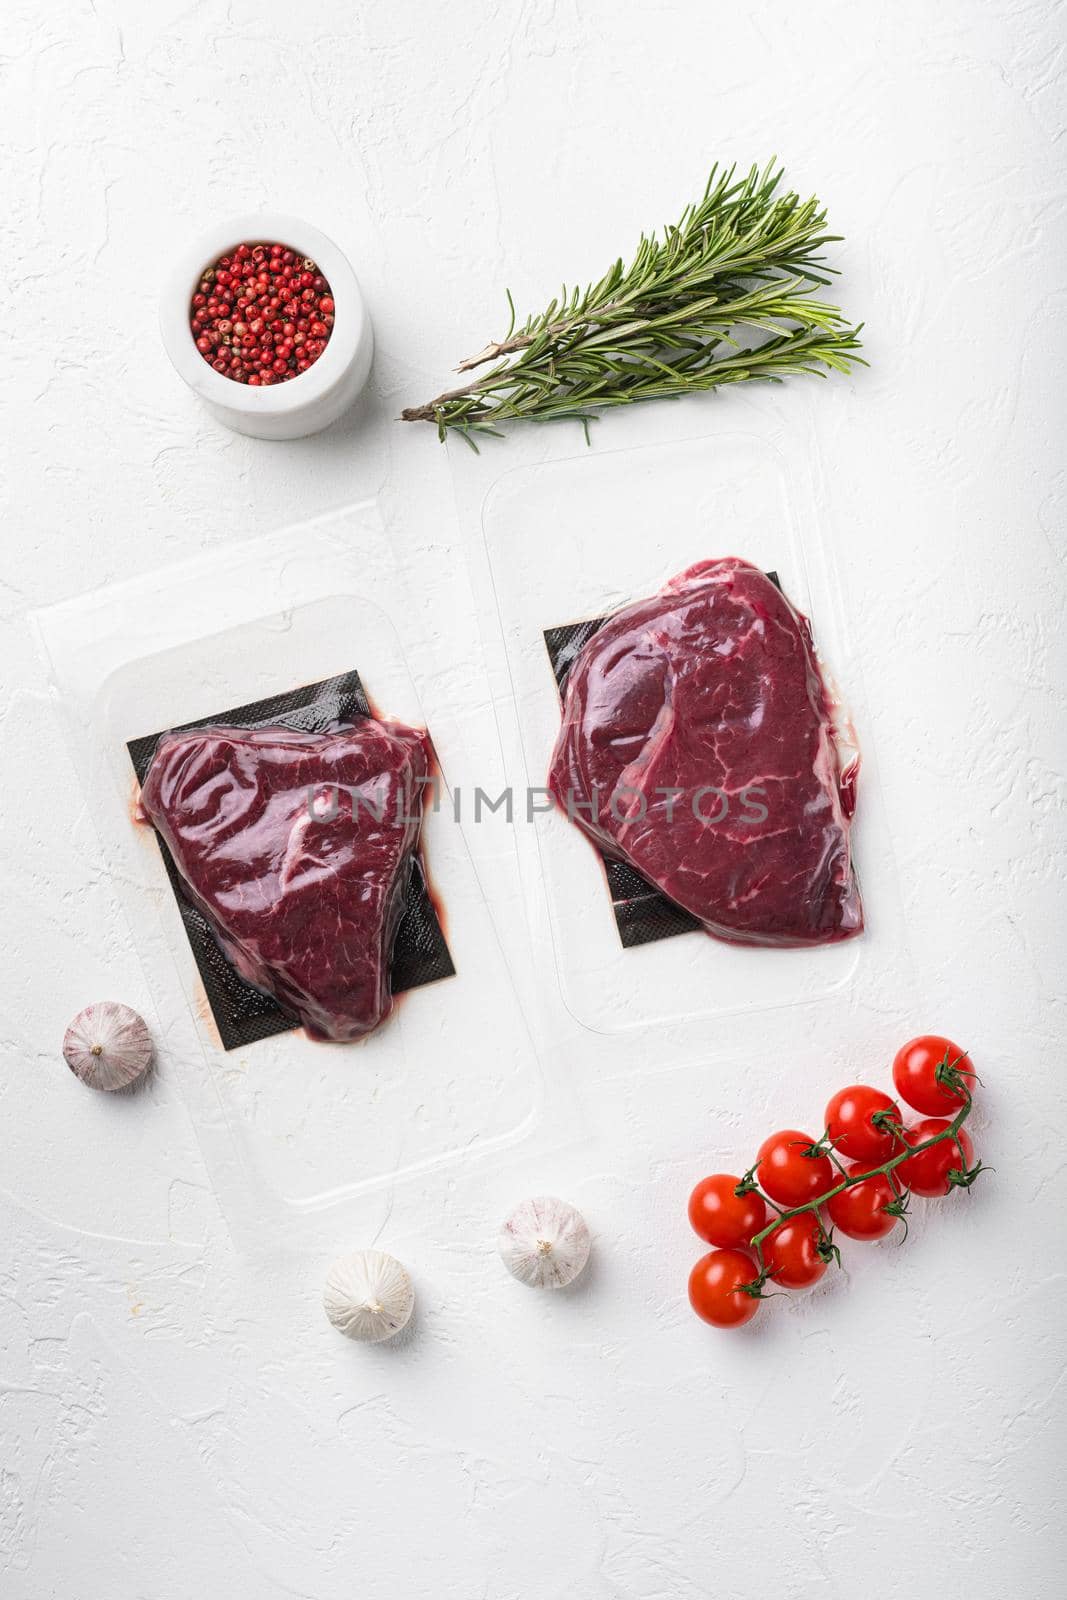 Beef steak vacuum sealed, on white stone table background, top view flat lay by Ilianesolenyi